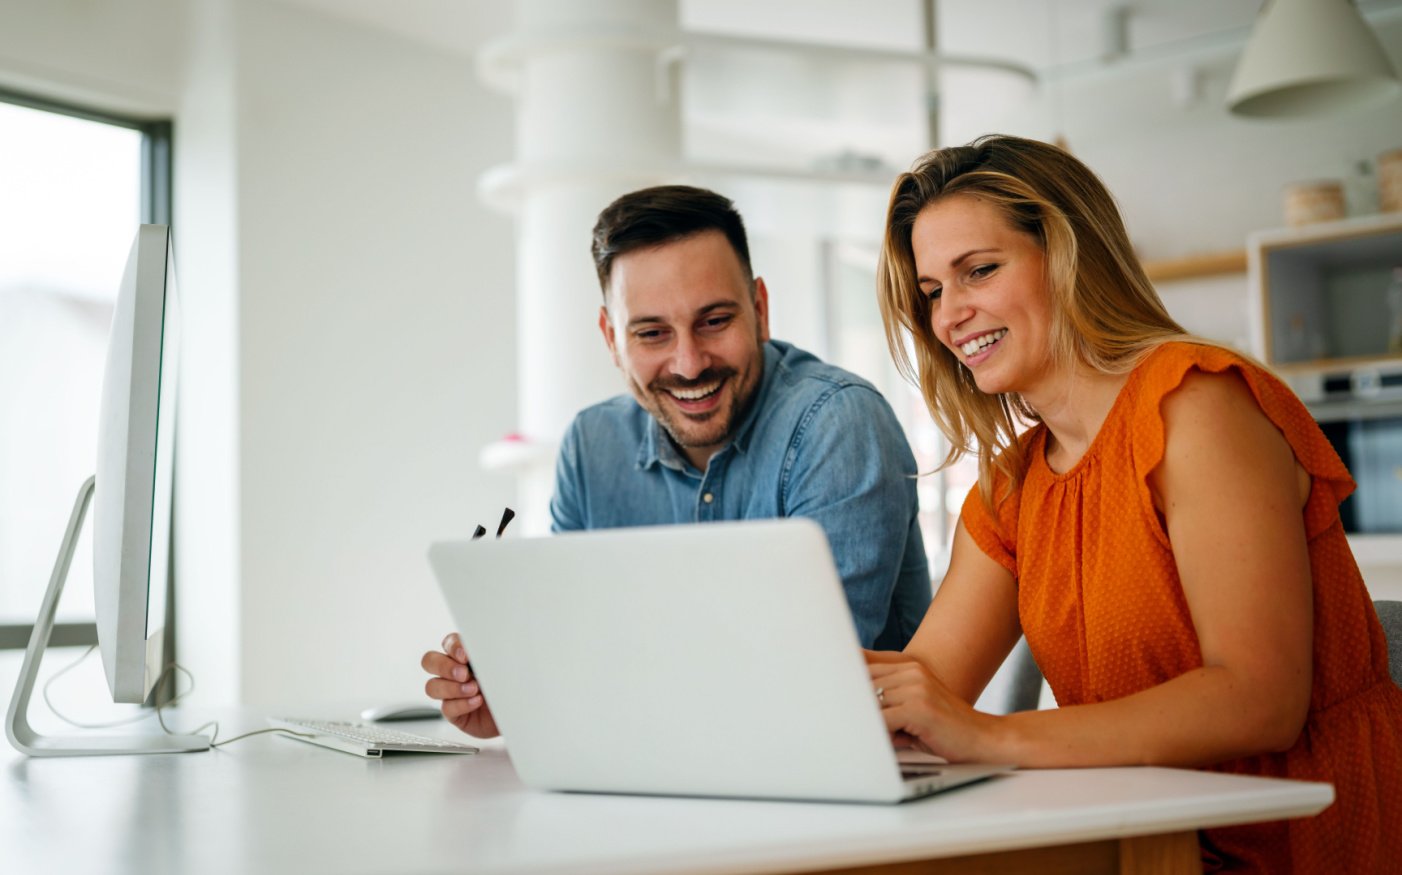 Happy, successful man and woman working together at an open laptop solving business challenges with Microsoft’s Power Platform suite of applications